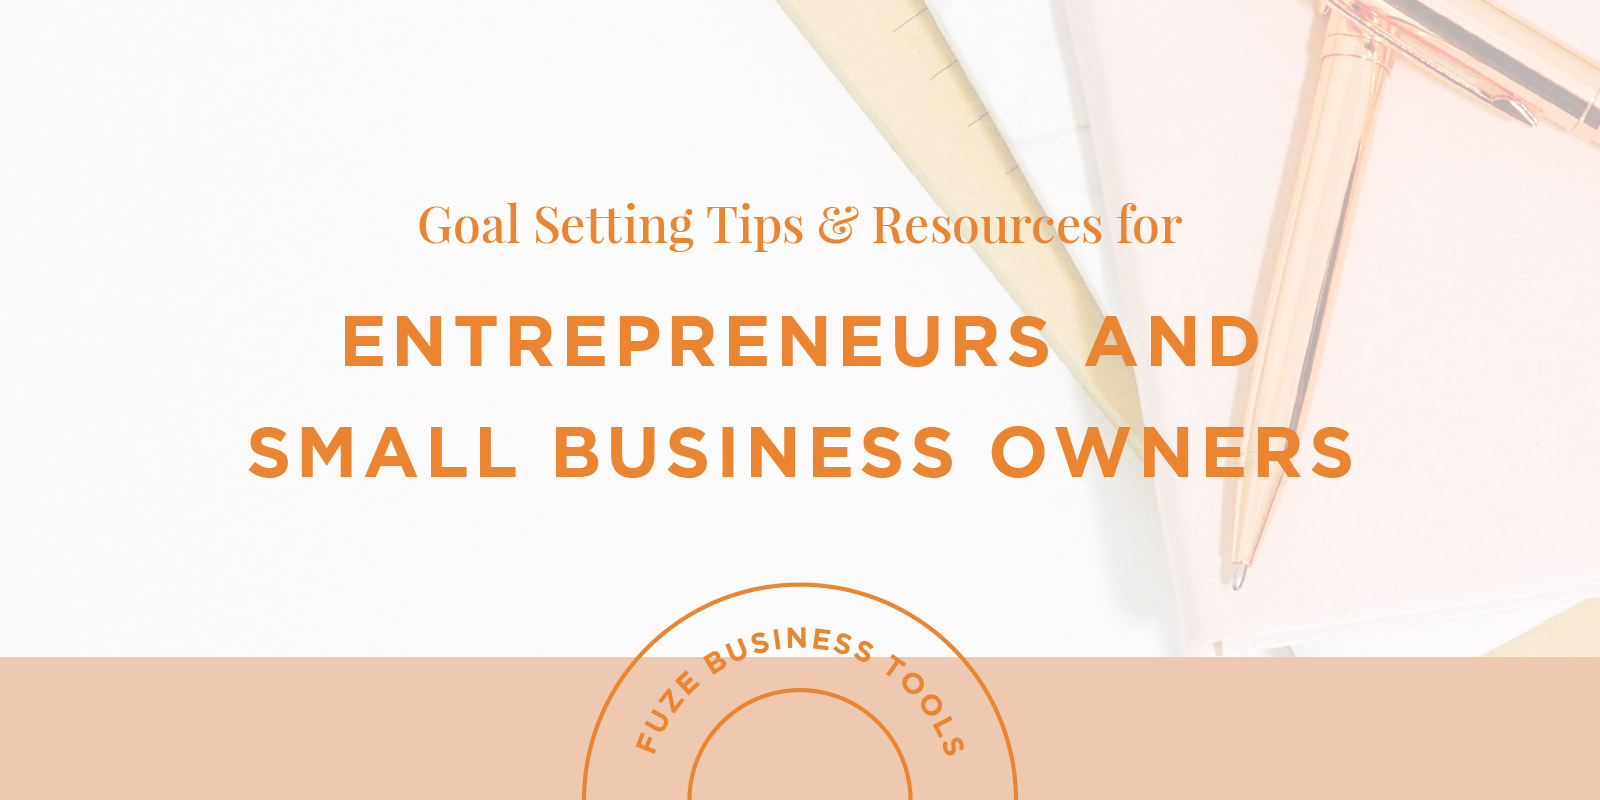 Small Business Goal Setting Resources